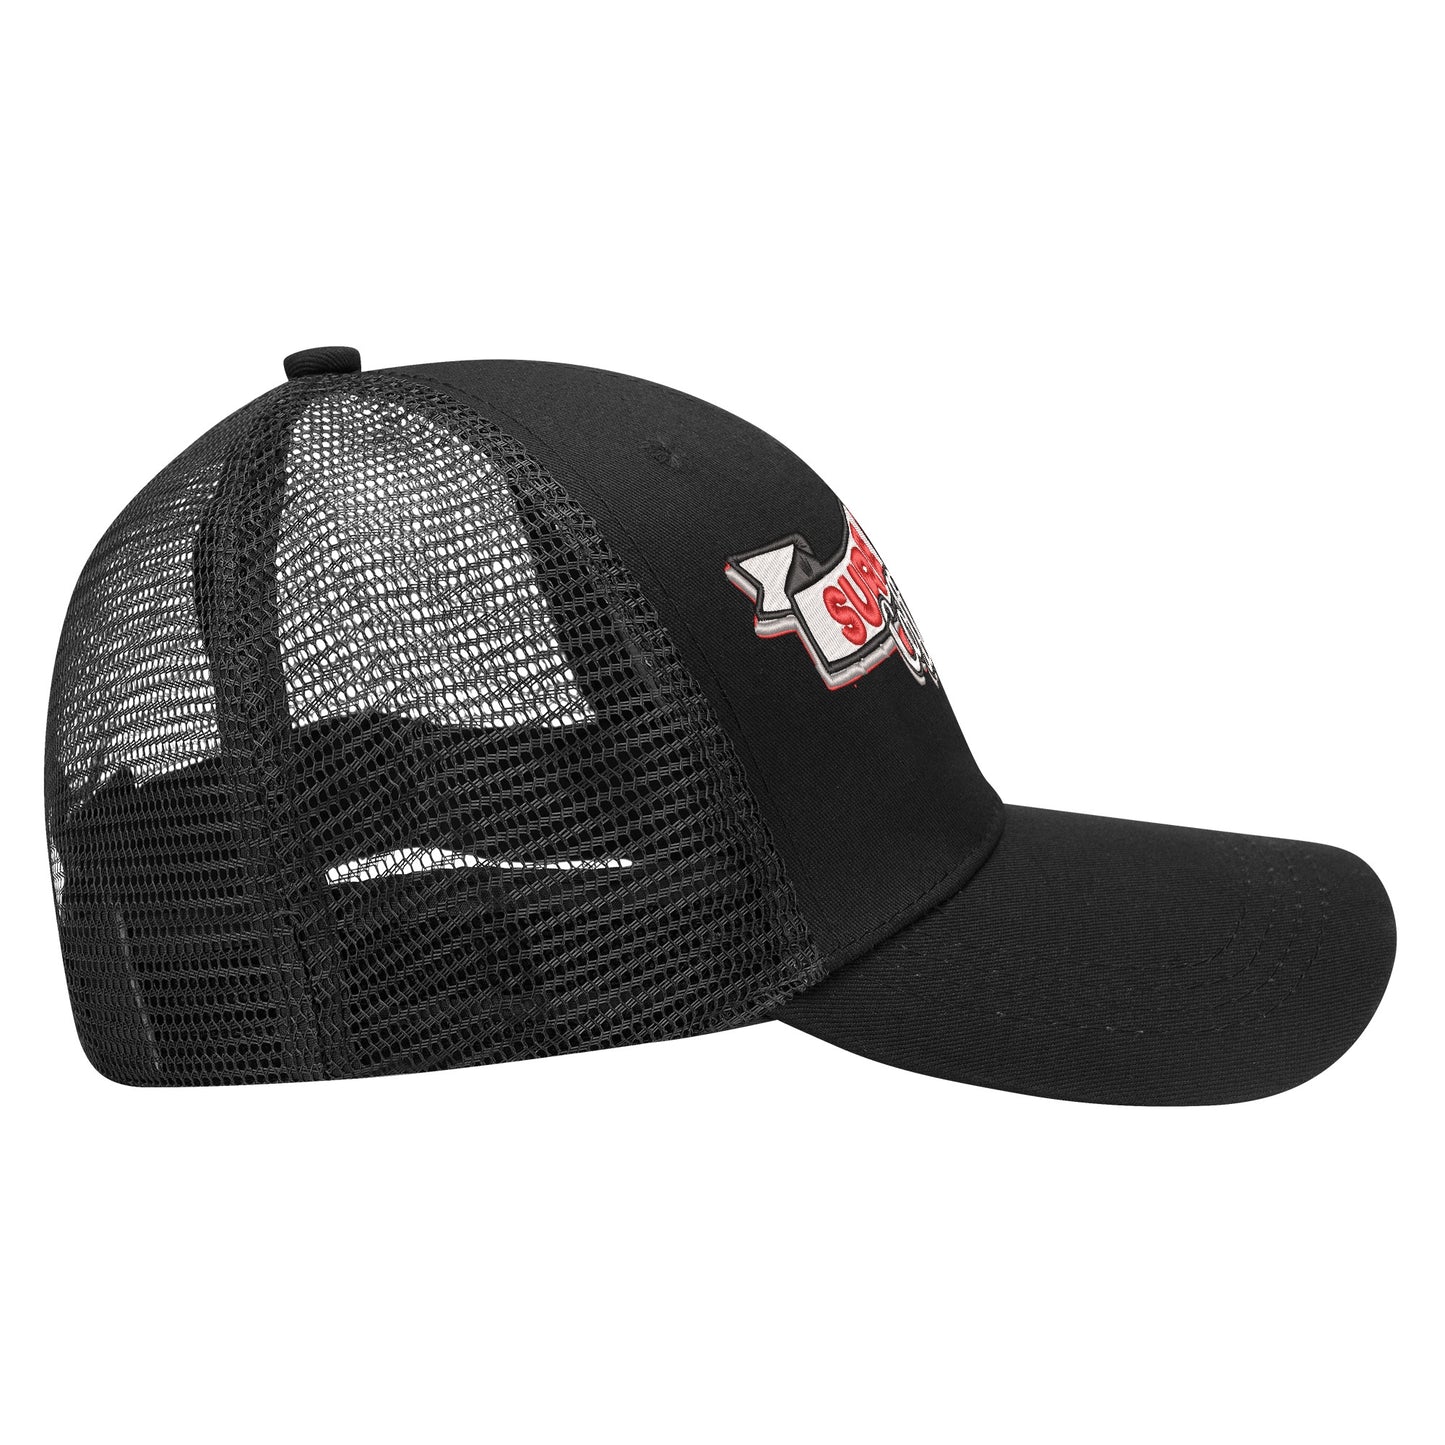 Sure Bet Coffee Embroidered TRUCKER Hat